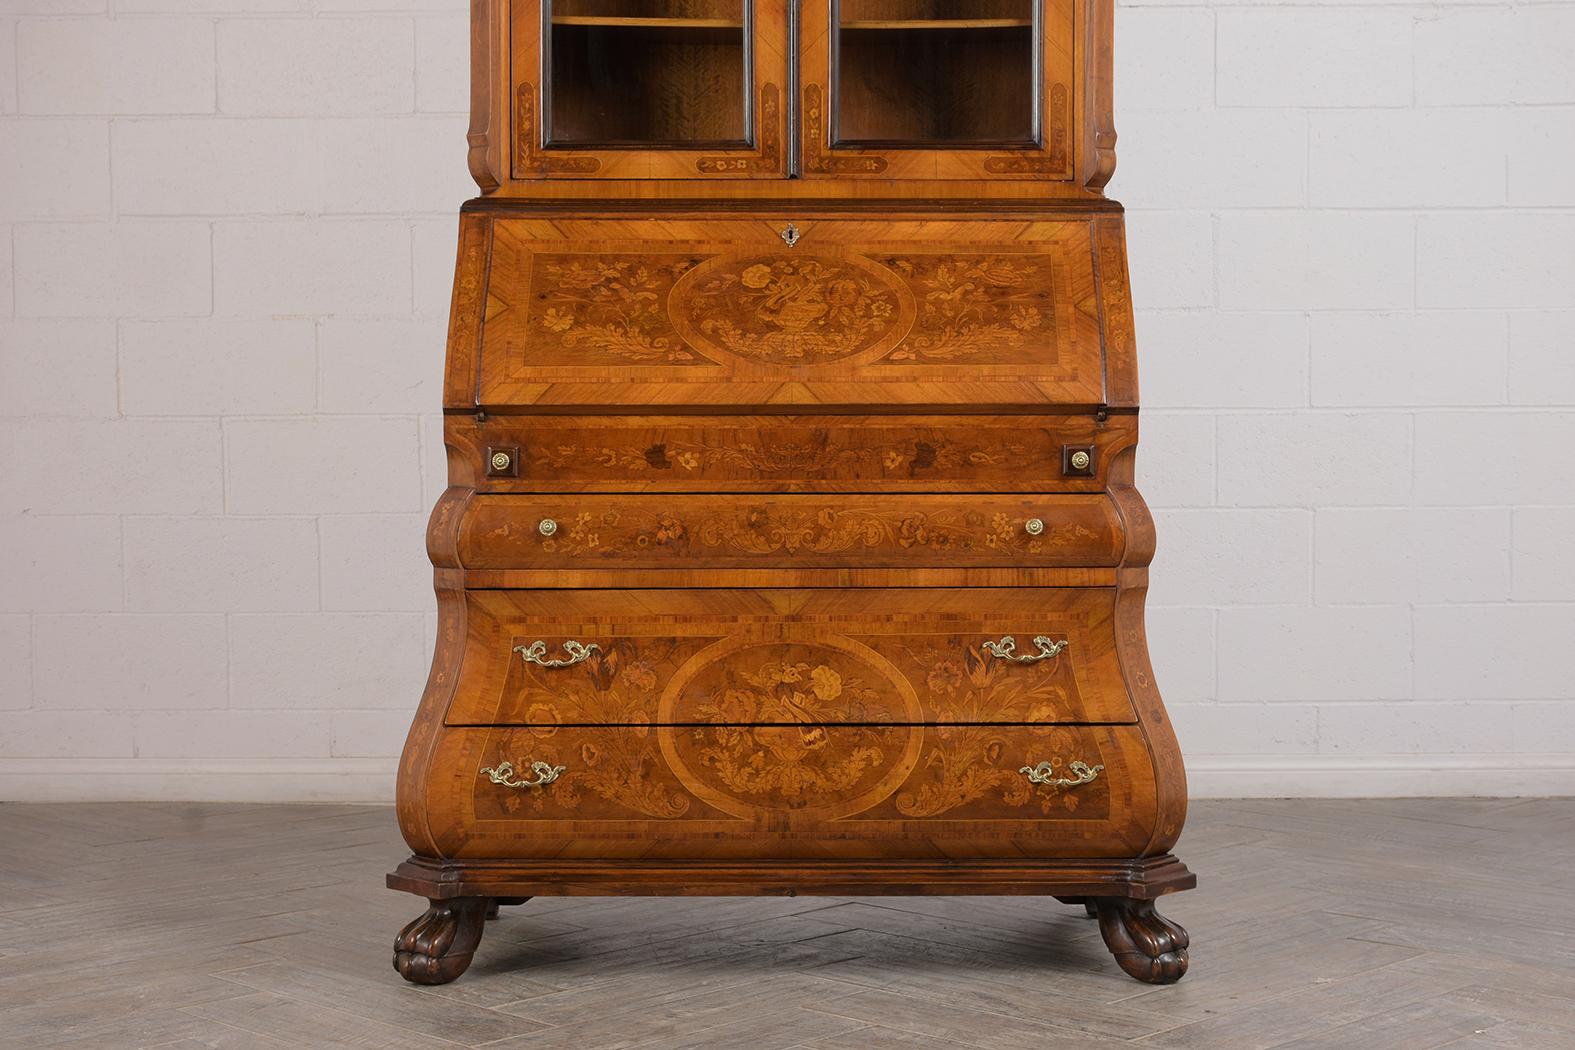 This antique Dutch bookcase / secretaire has been restored with its original mahogany finish. This remarkable piece has a unique inlaid over the entire piece. The top has large carved seashell at the center, two carved doors with original glass and